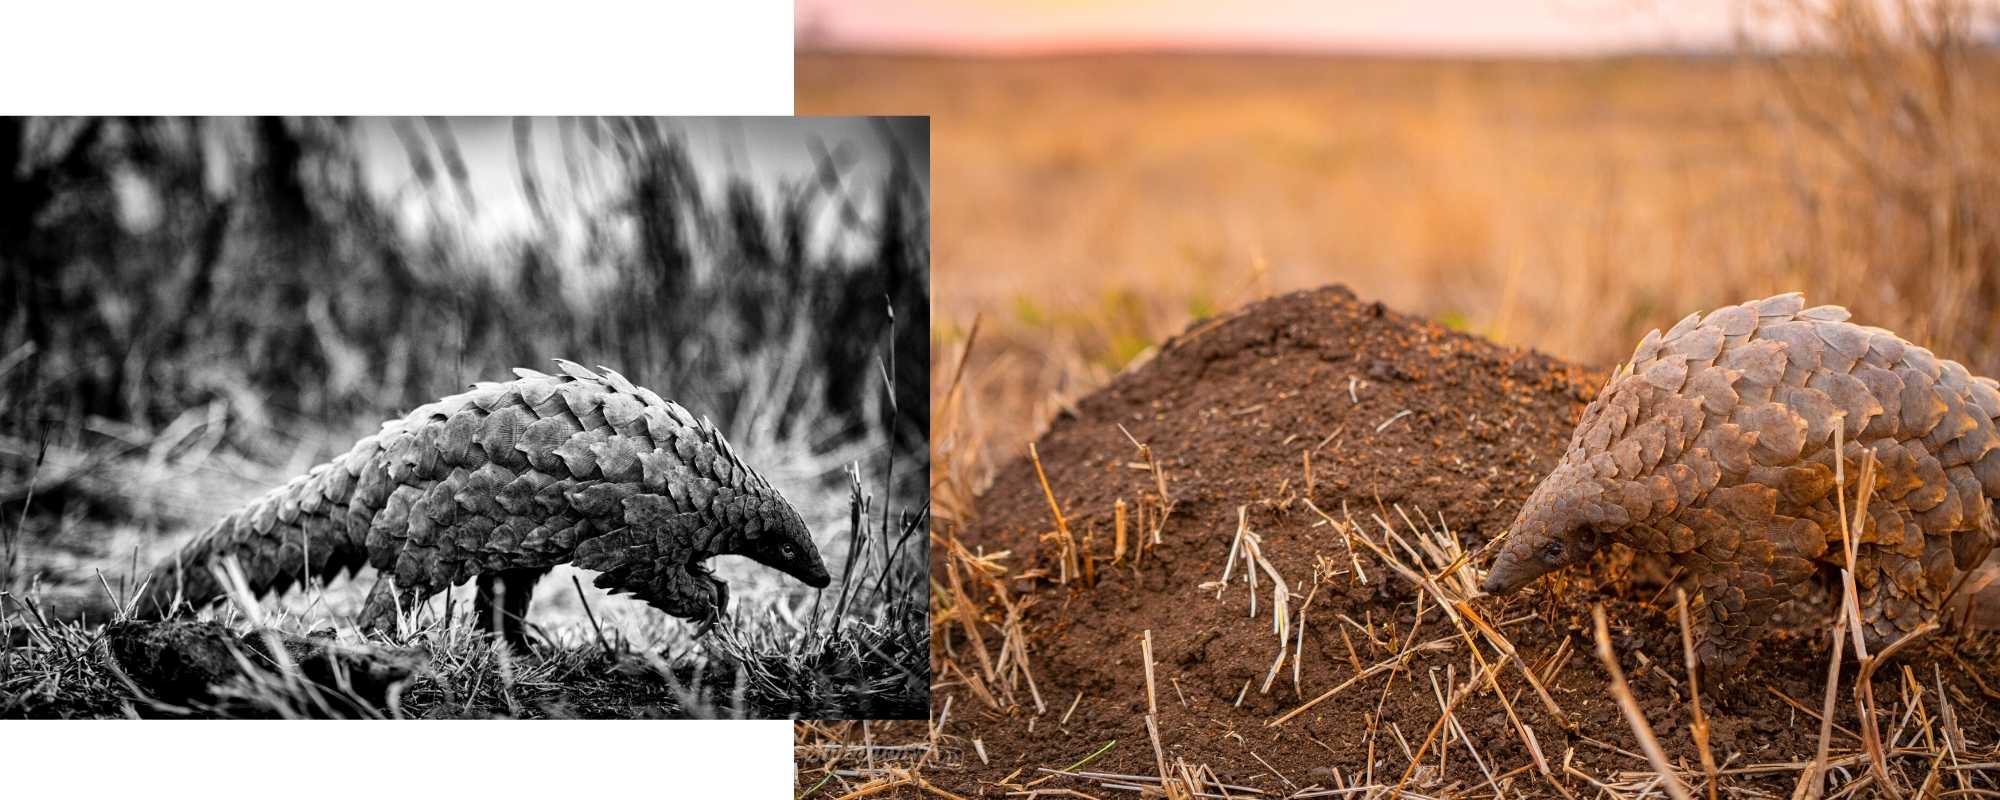 Pangolin photos by Shannon Wild